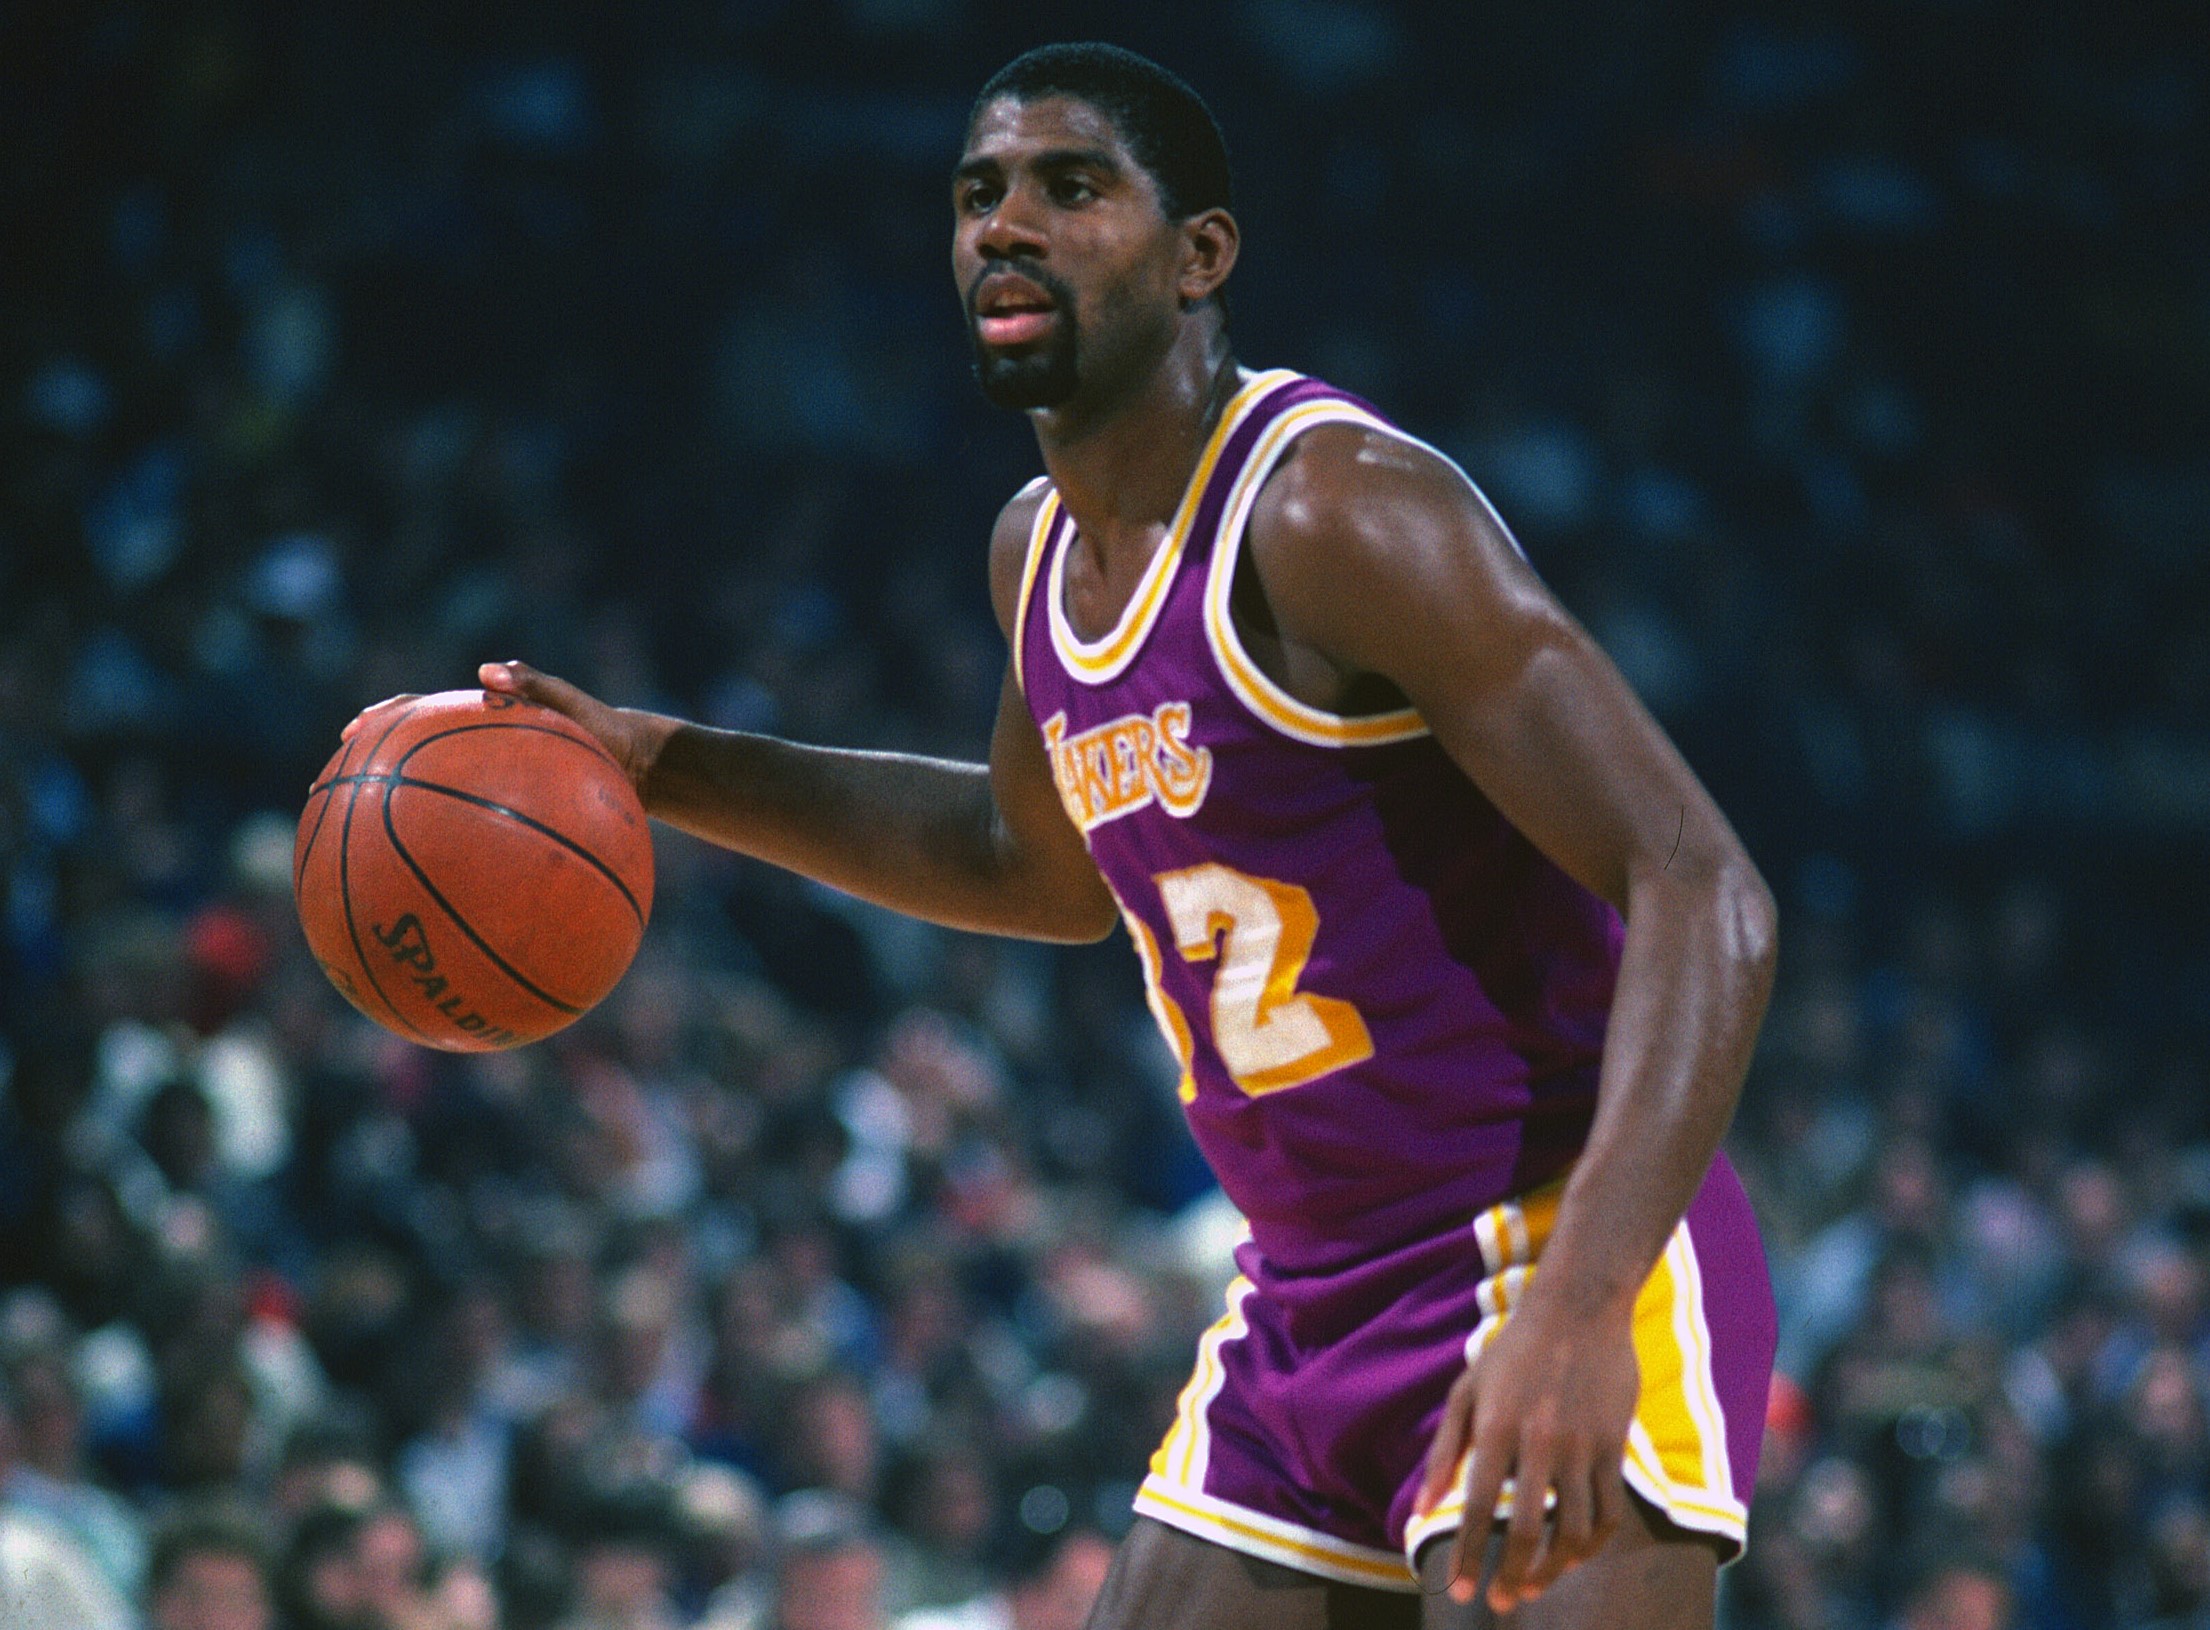 Earvin Magic Johnson of the Los Angeles Lakers dribbles the ball.